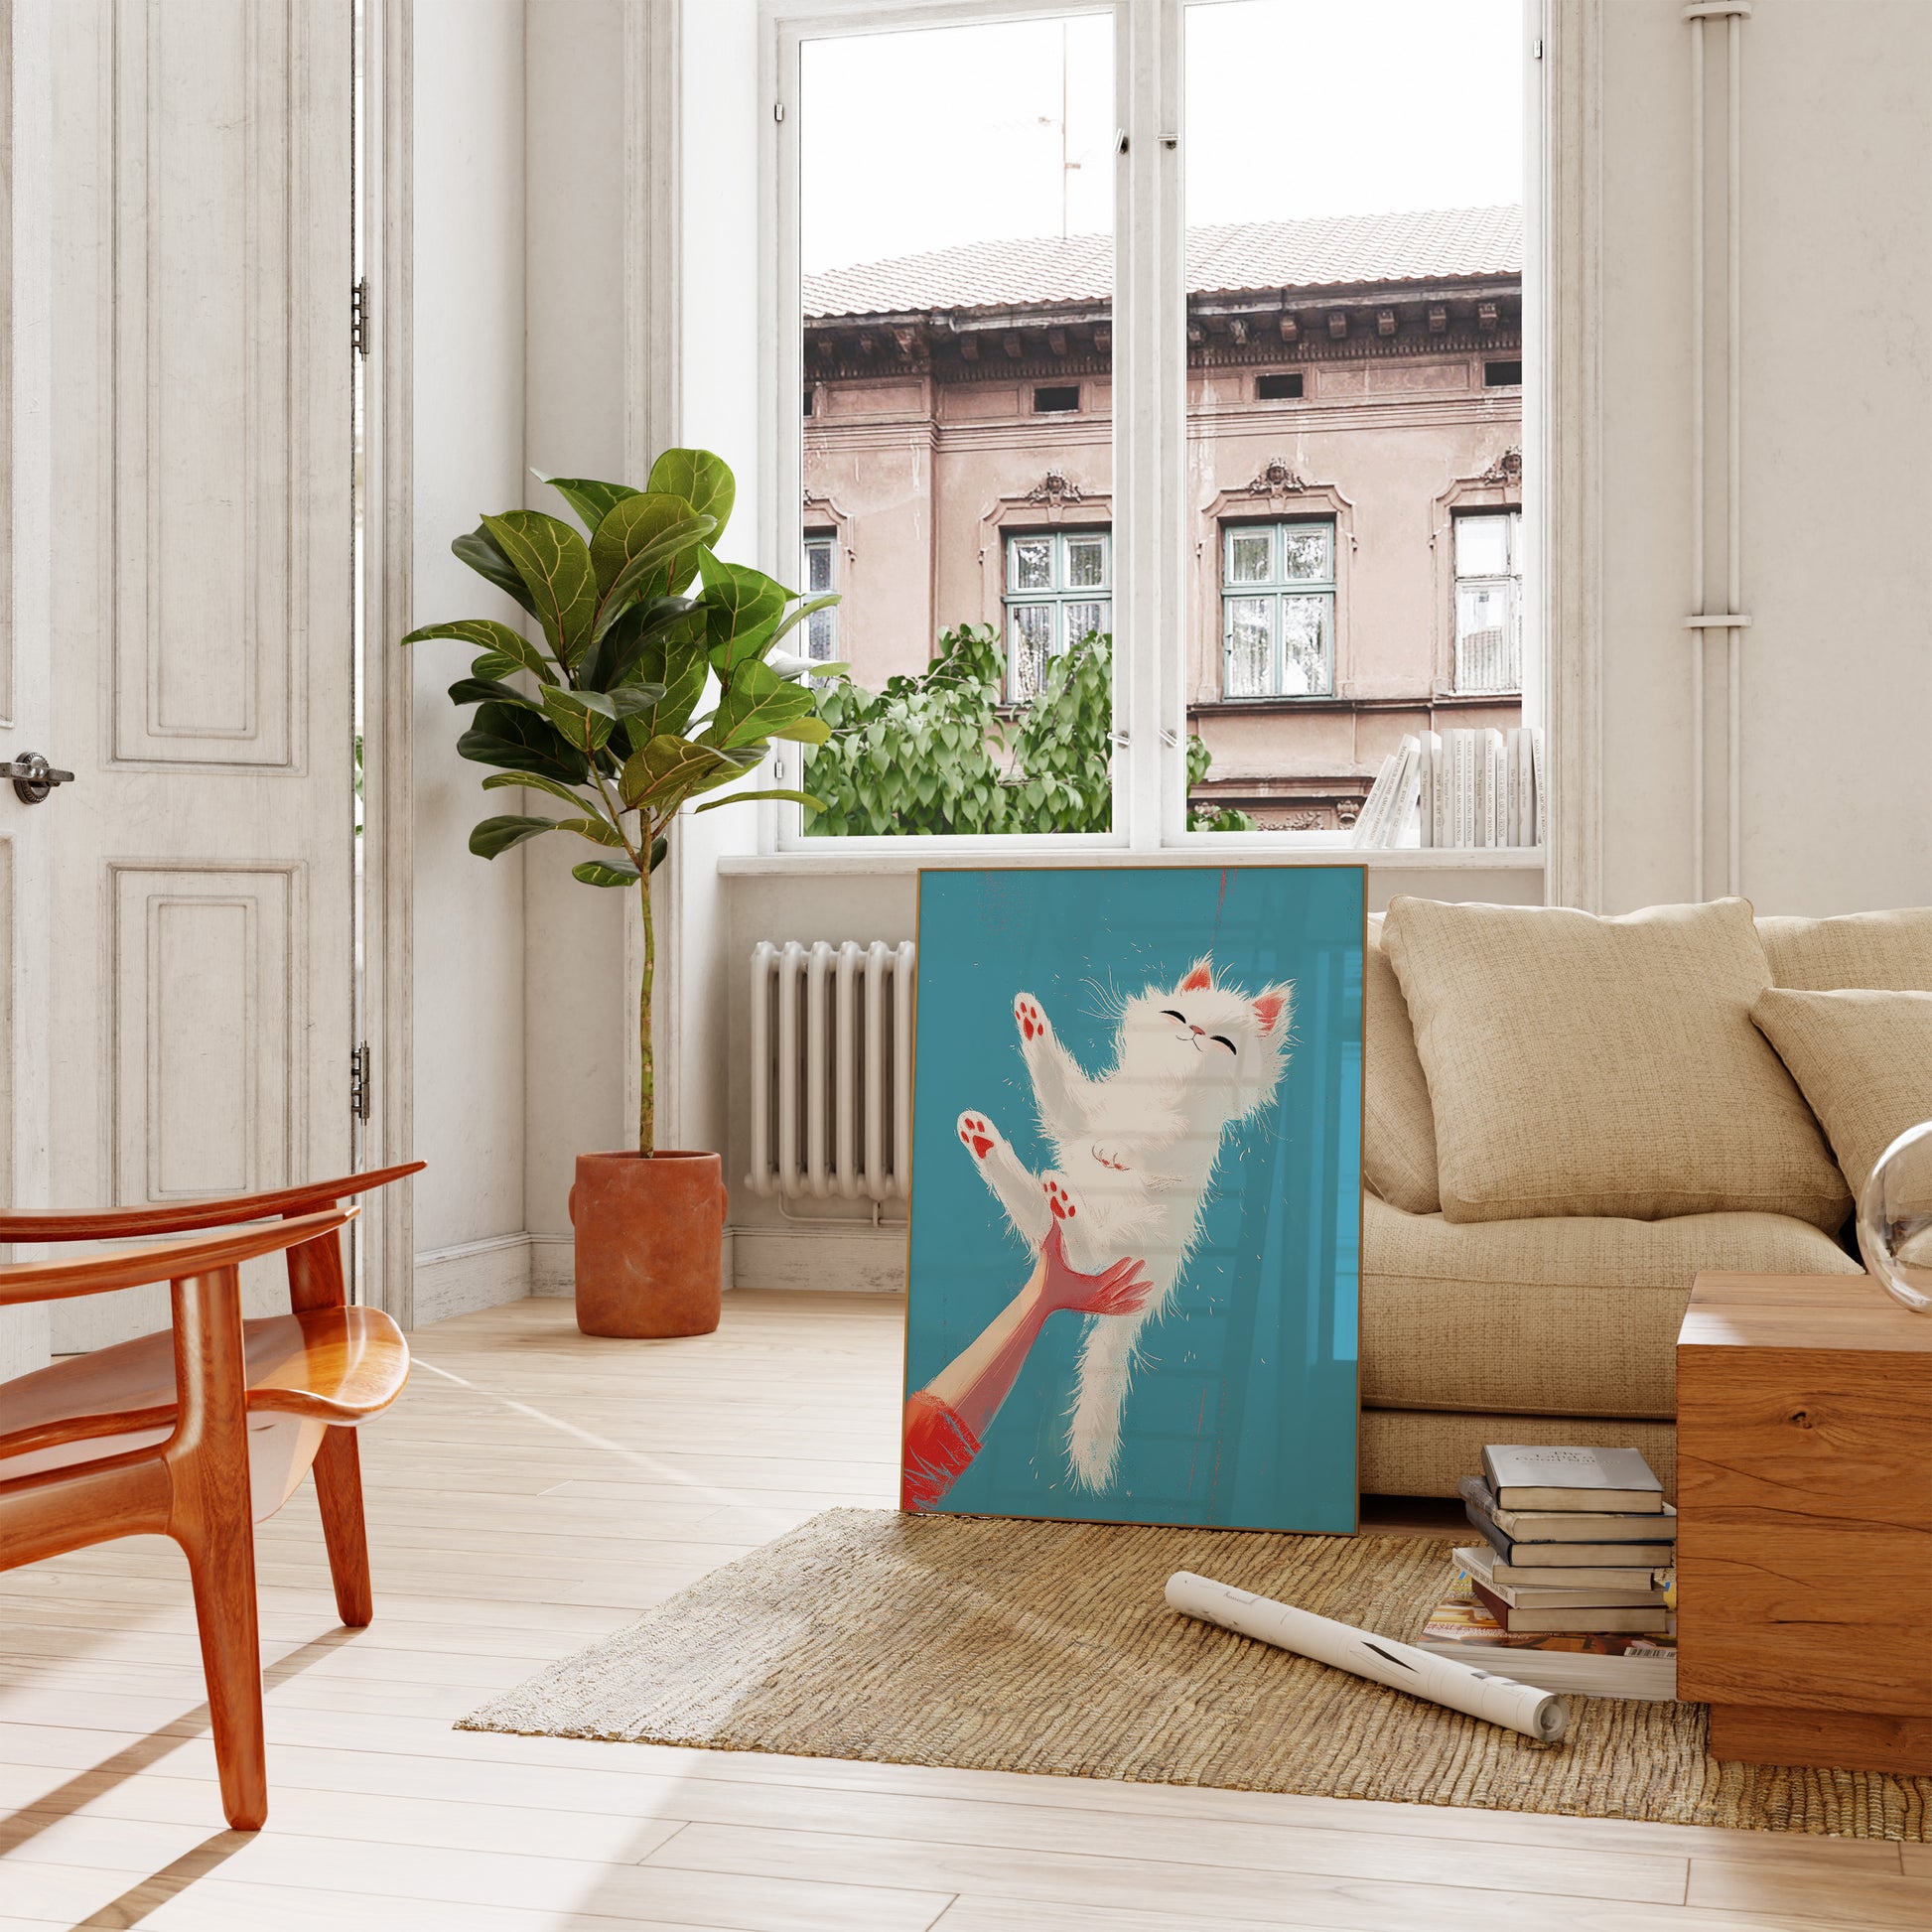 Bright living room with a sofa, a plant, and a playful cat painting leaning against the wall.